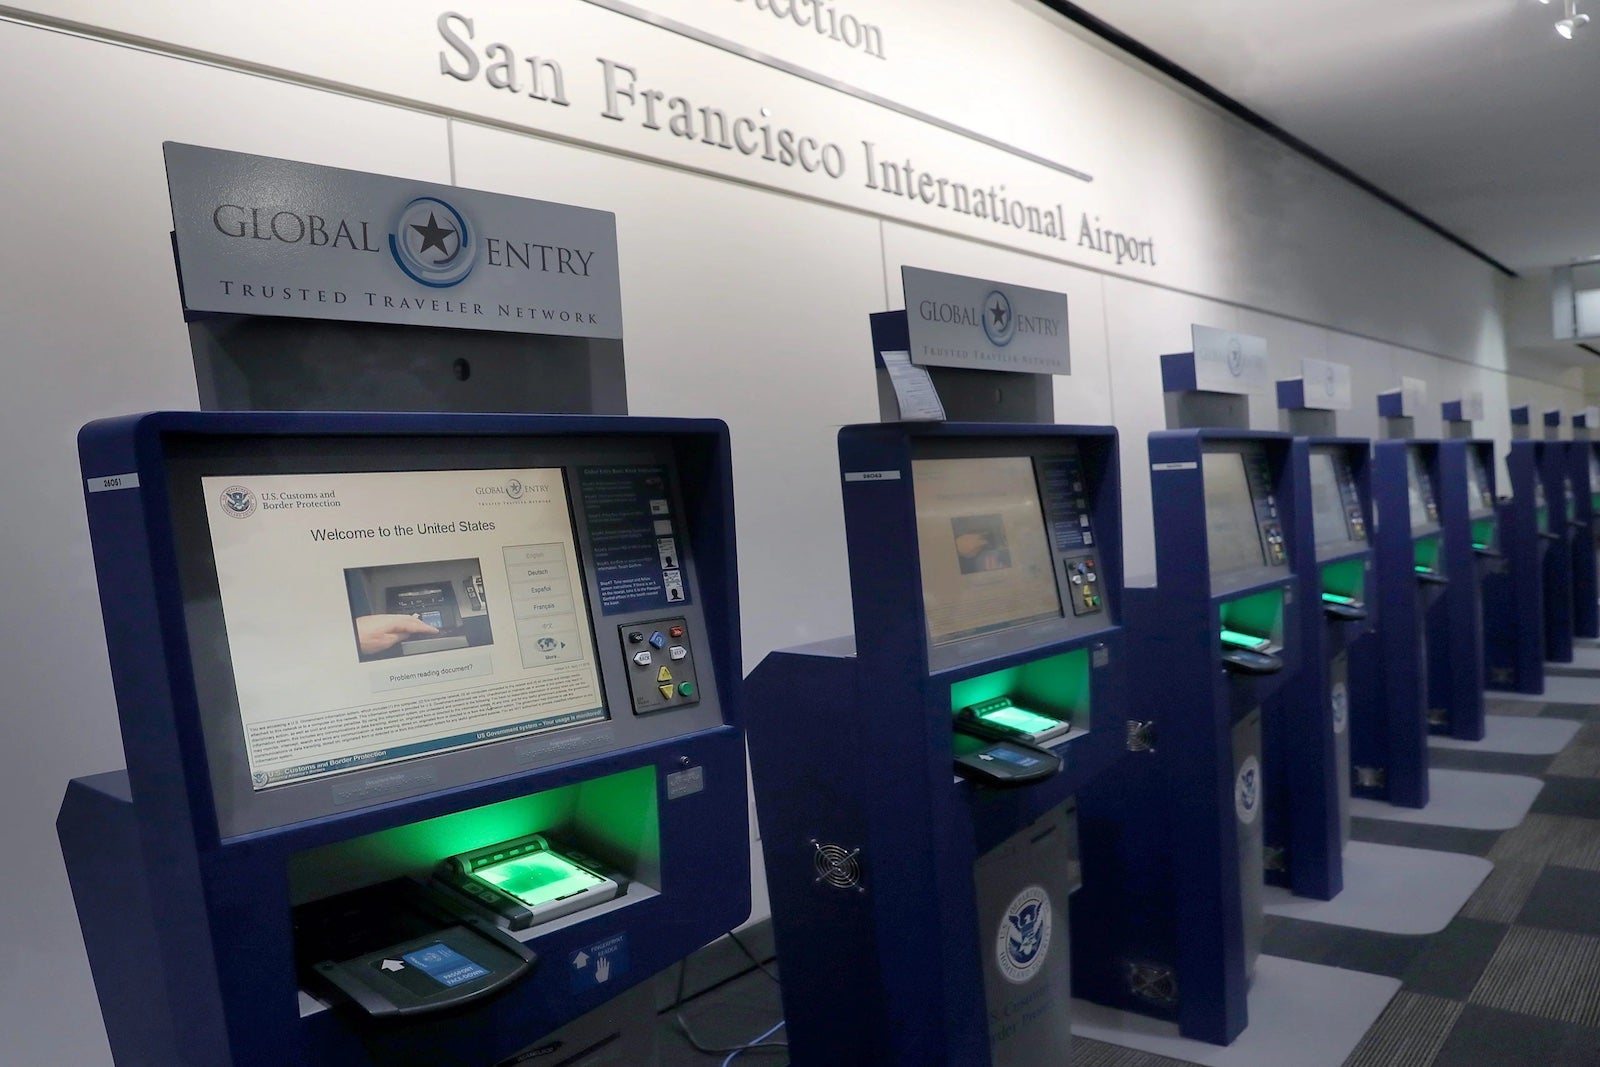 Global Entry airport kiosks at SFO